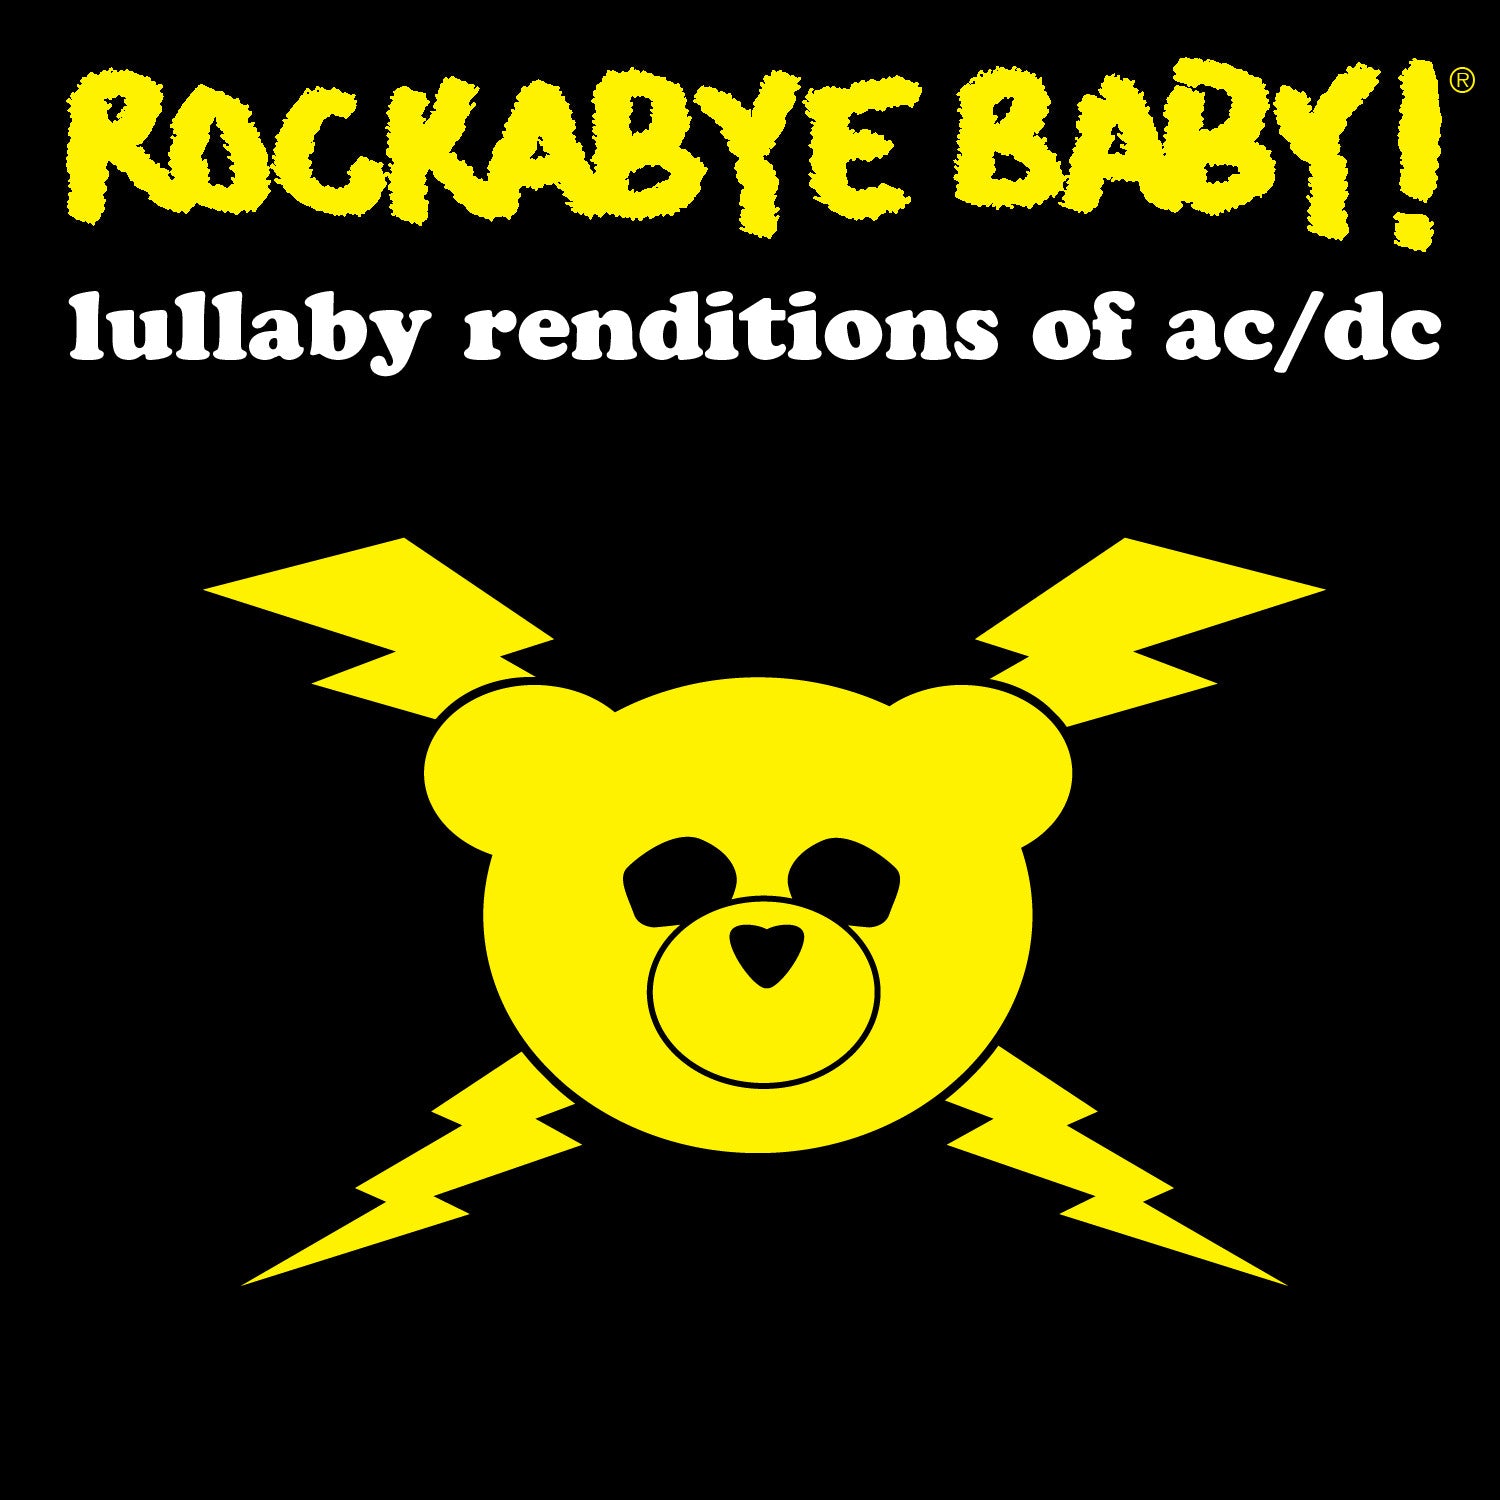 rockabye baby lullaby renditions acdc